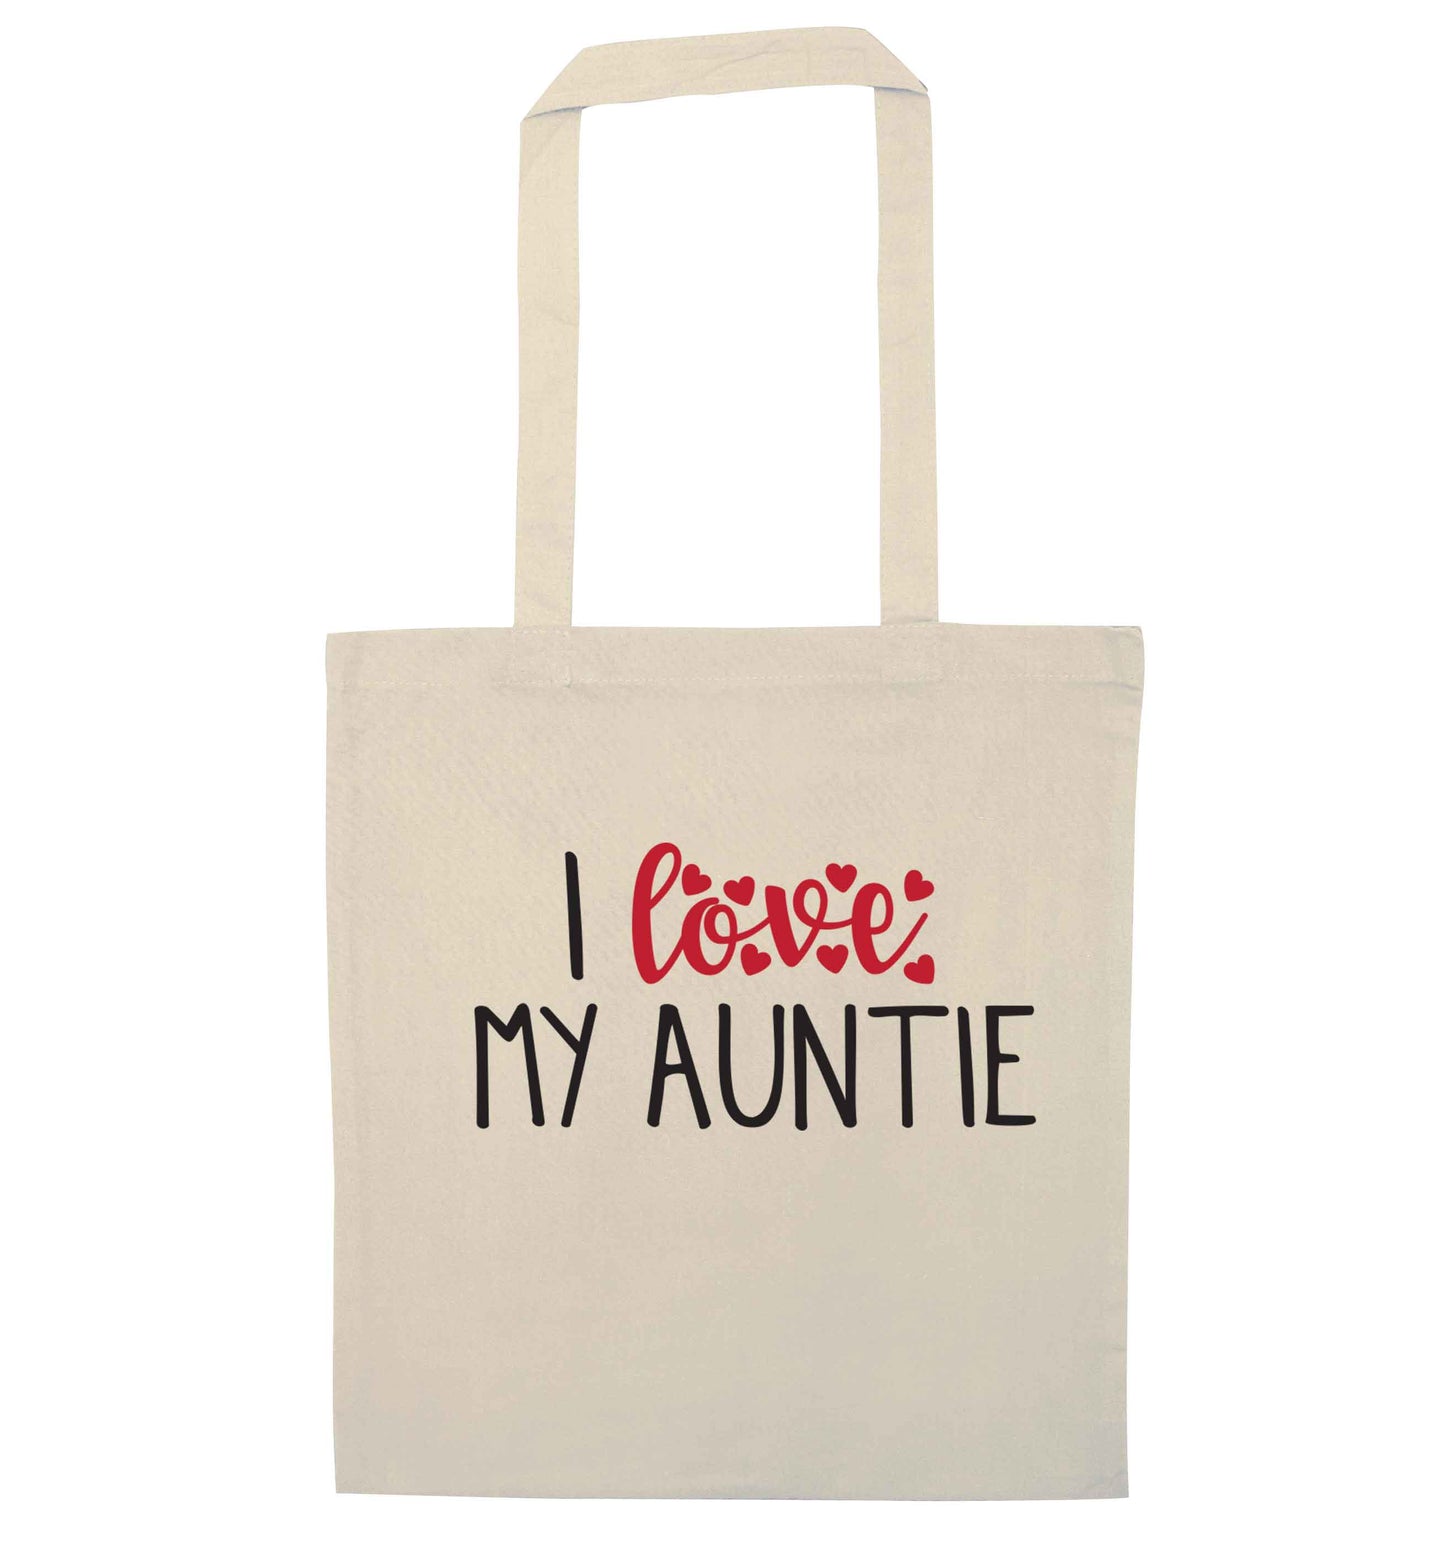 I love my auntie natural tote bag